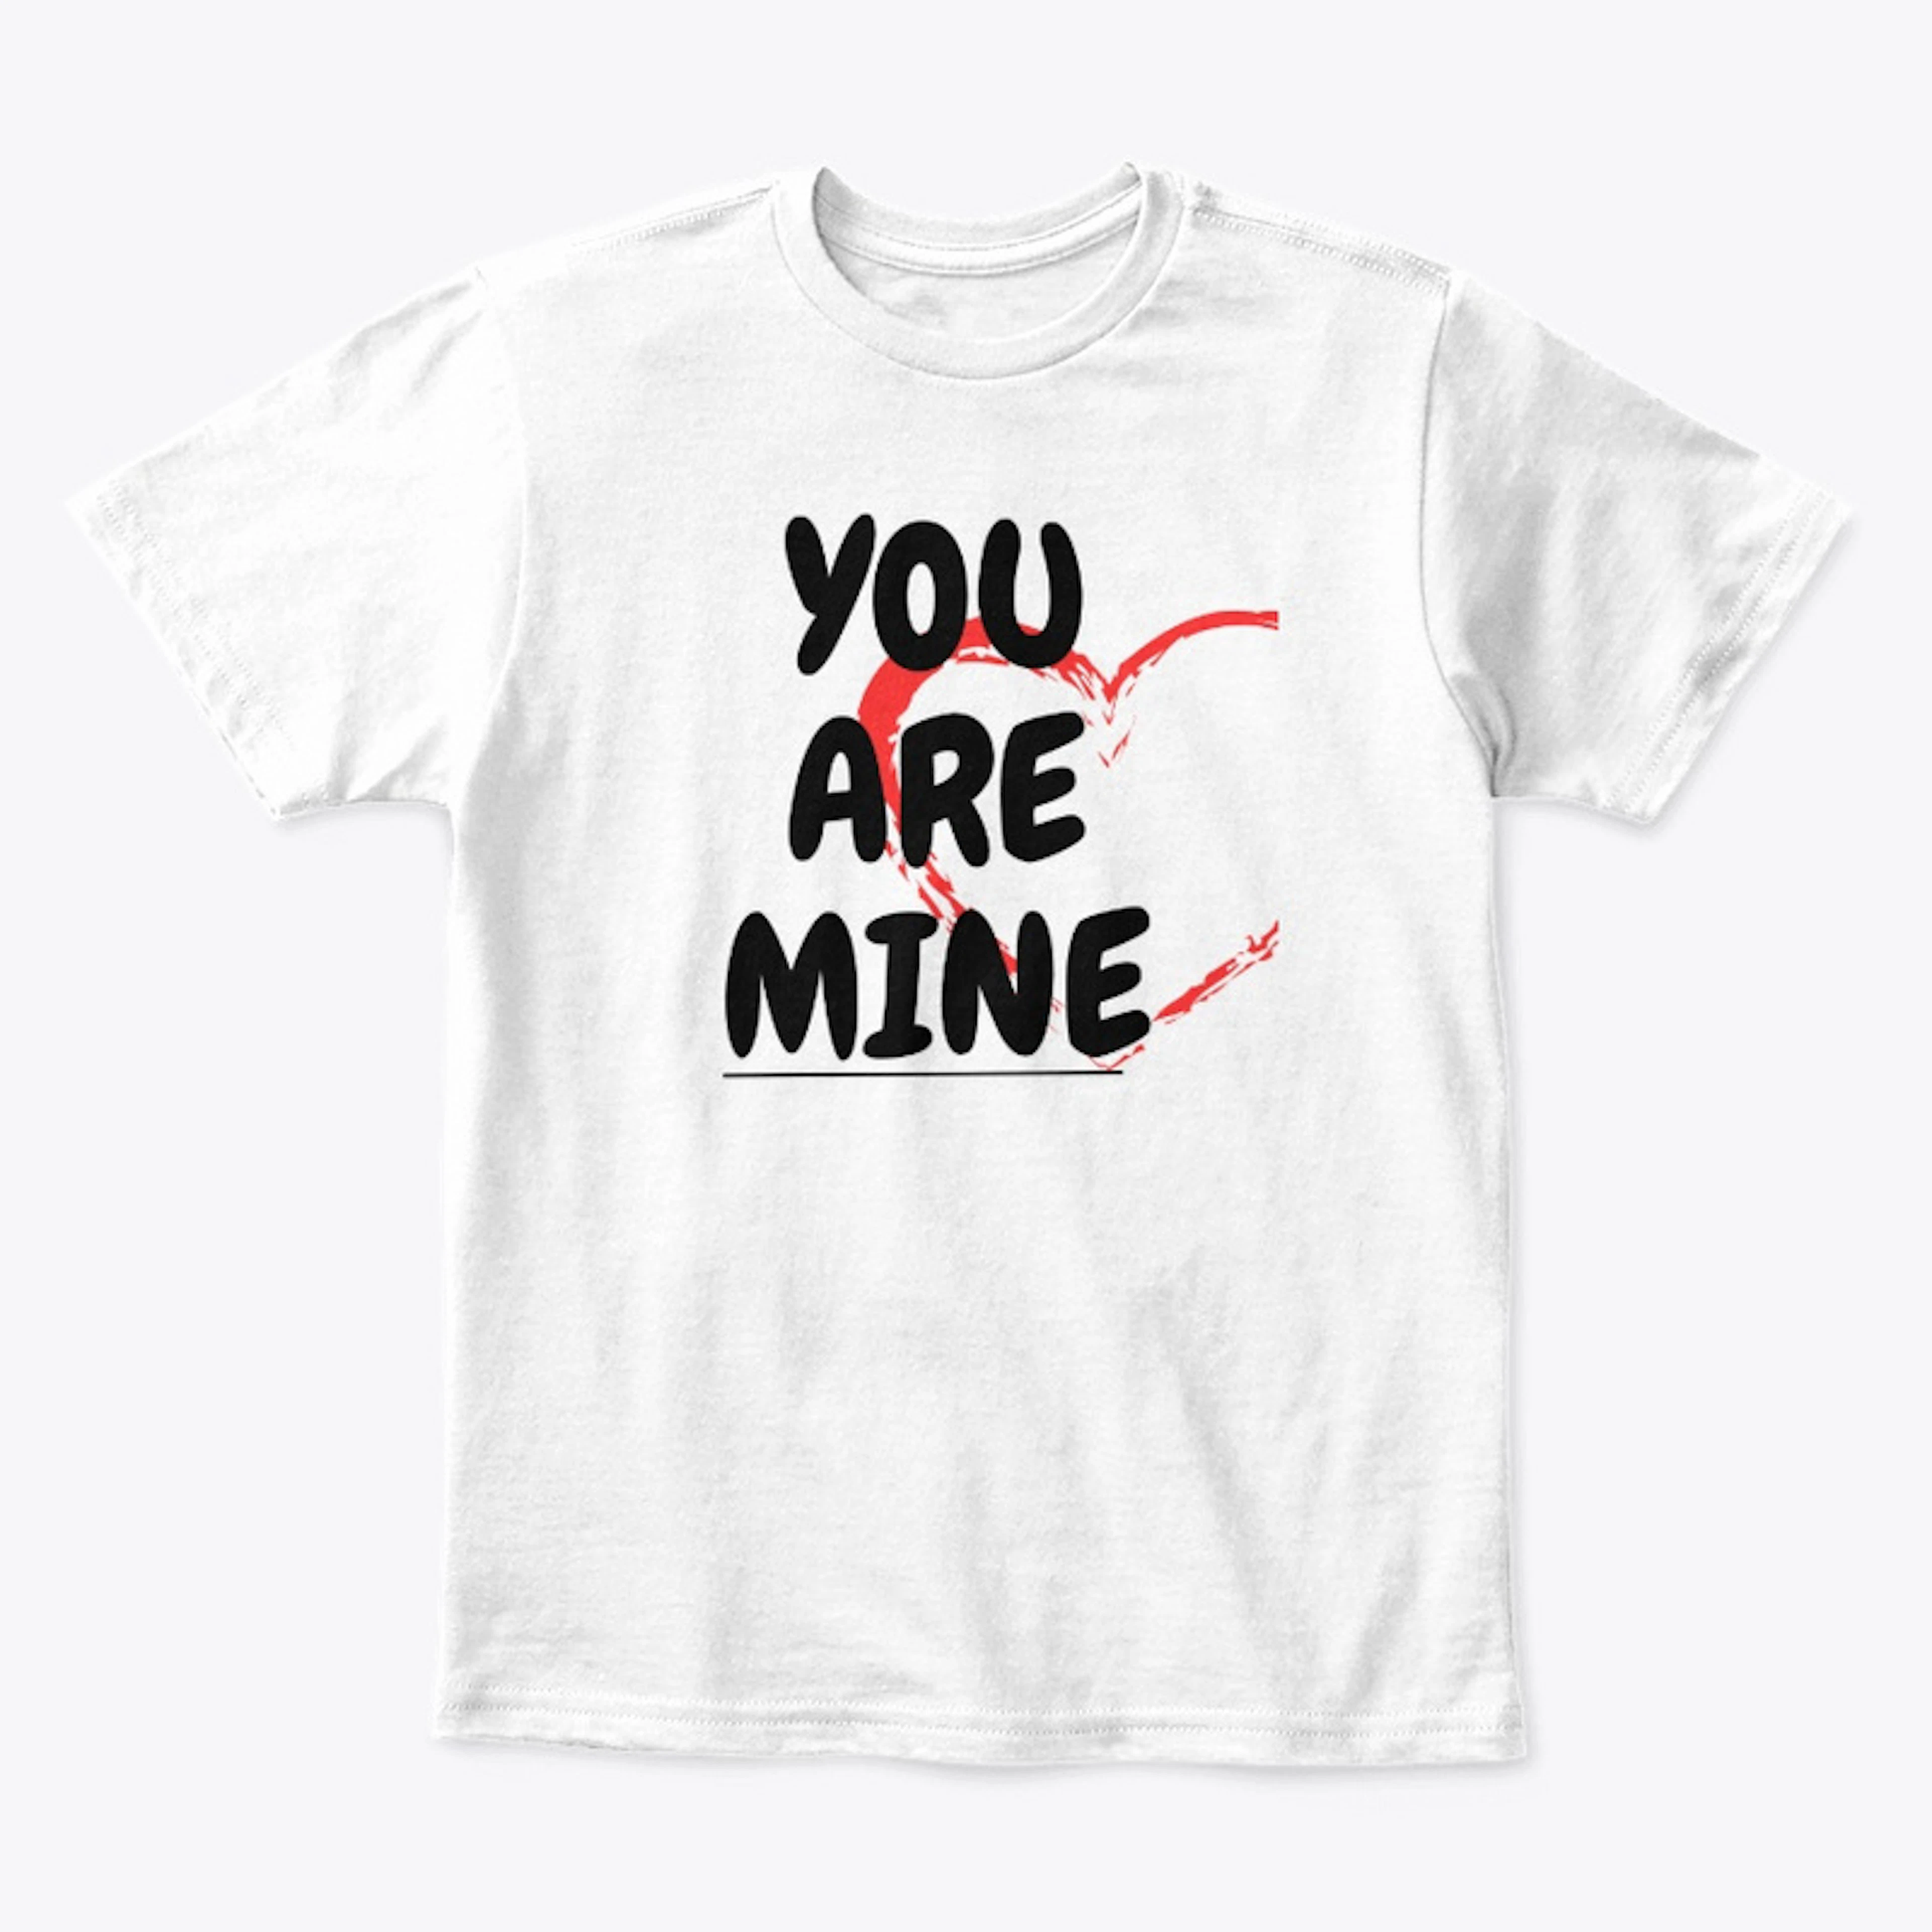 YOU ARE MINE Apparel and accessories